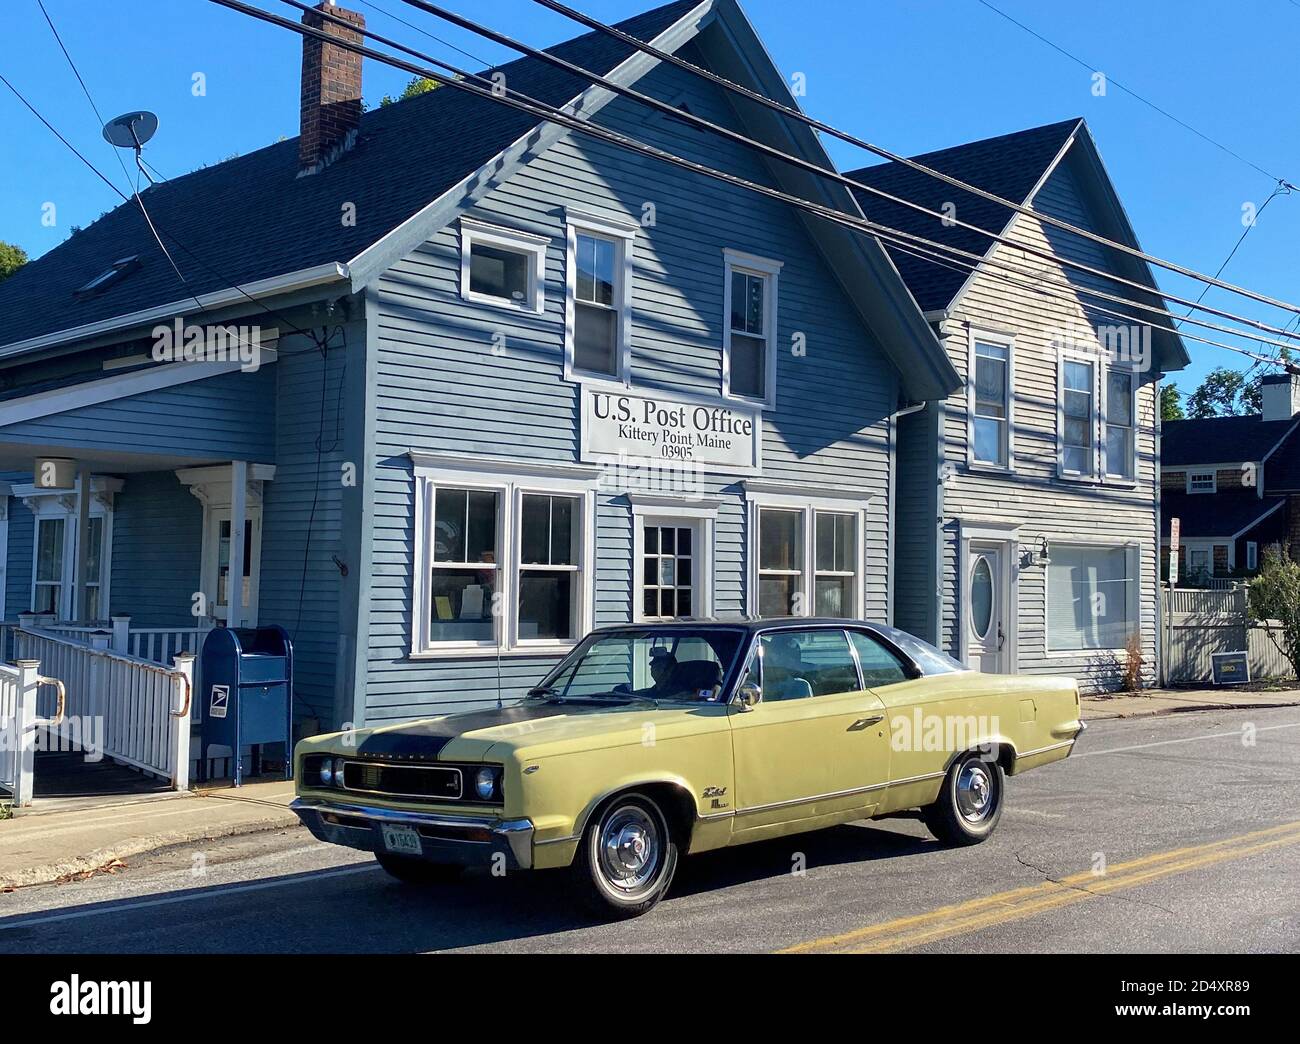 Post Office, Street Scene with Yellow Car, Kittery Point, Maine, USA Stock Photo